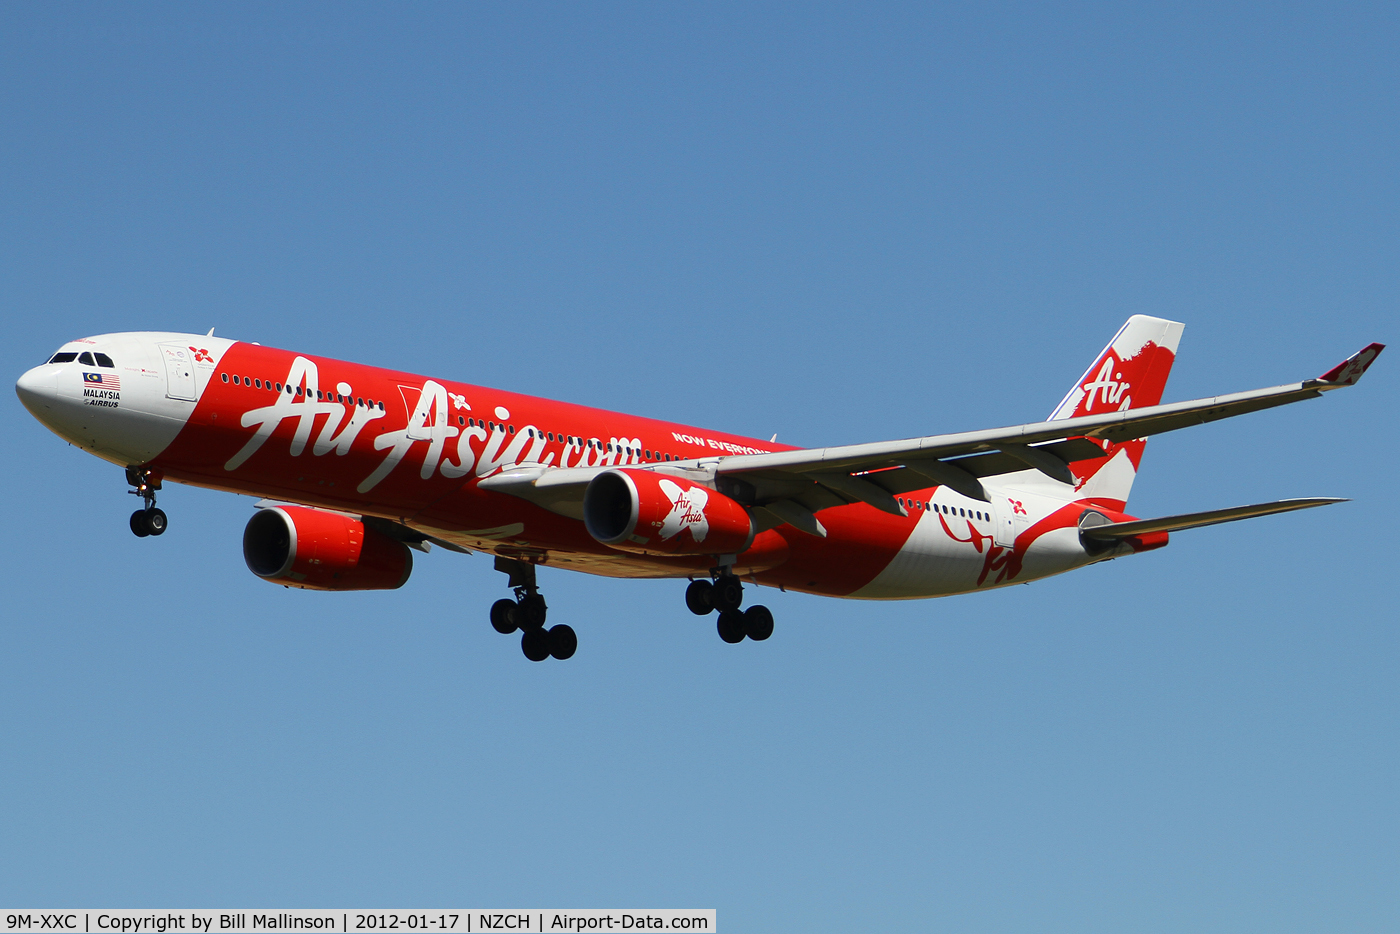 9M-XXC, 2009 Airbus A330-343X C/N 1048, finals to 02